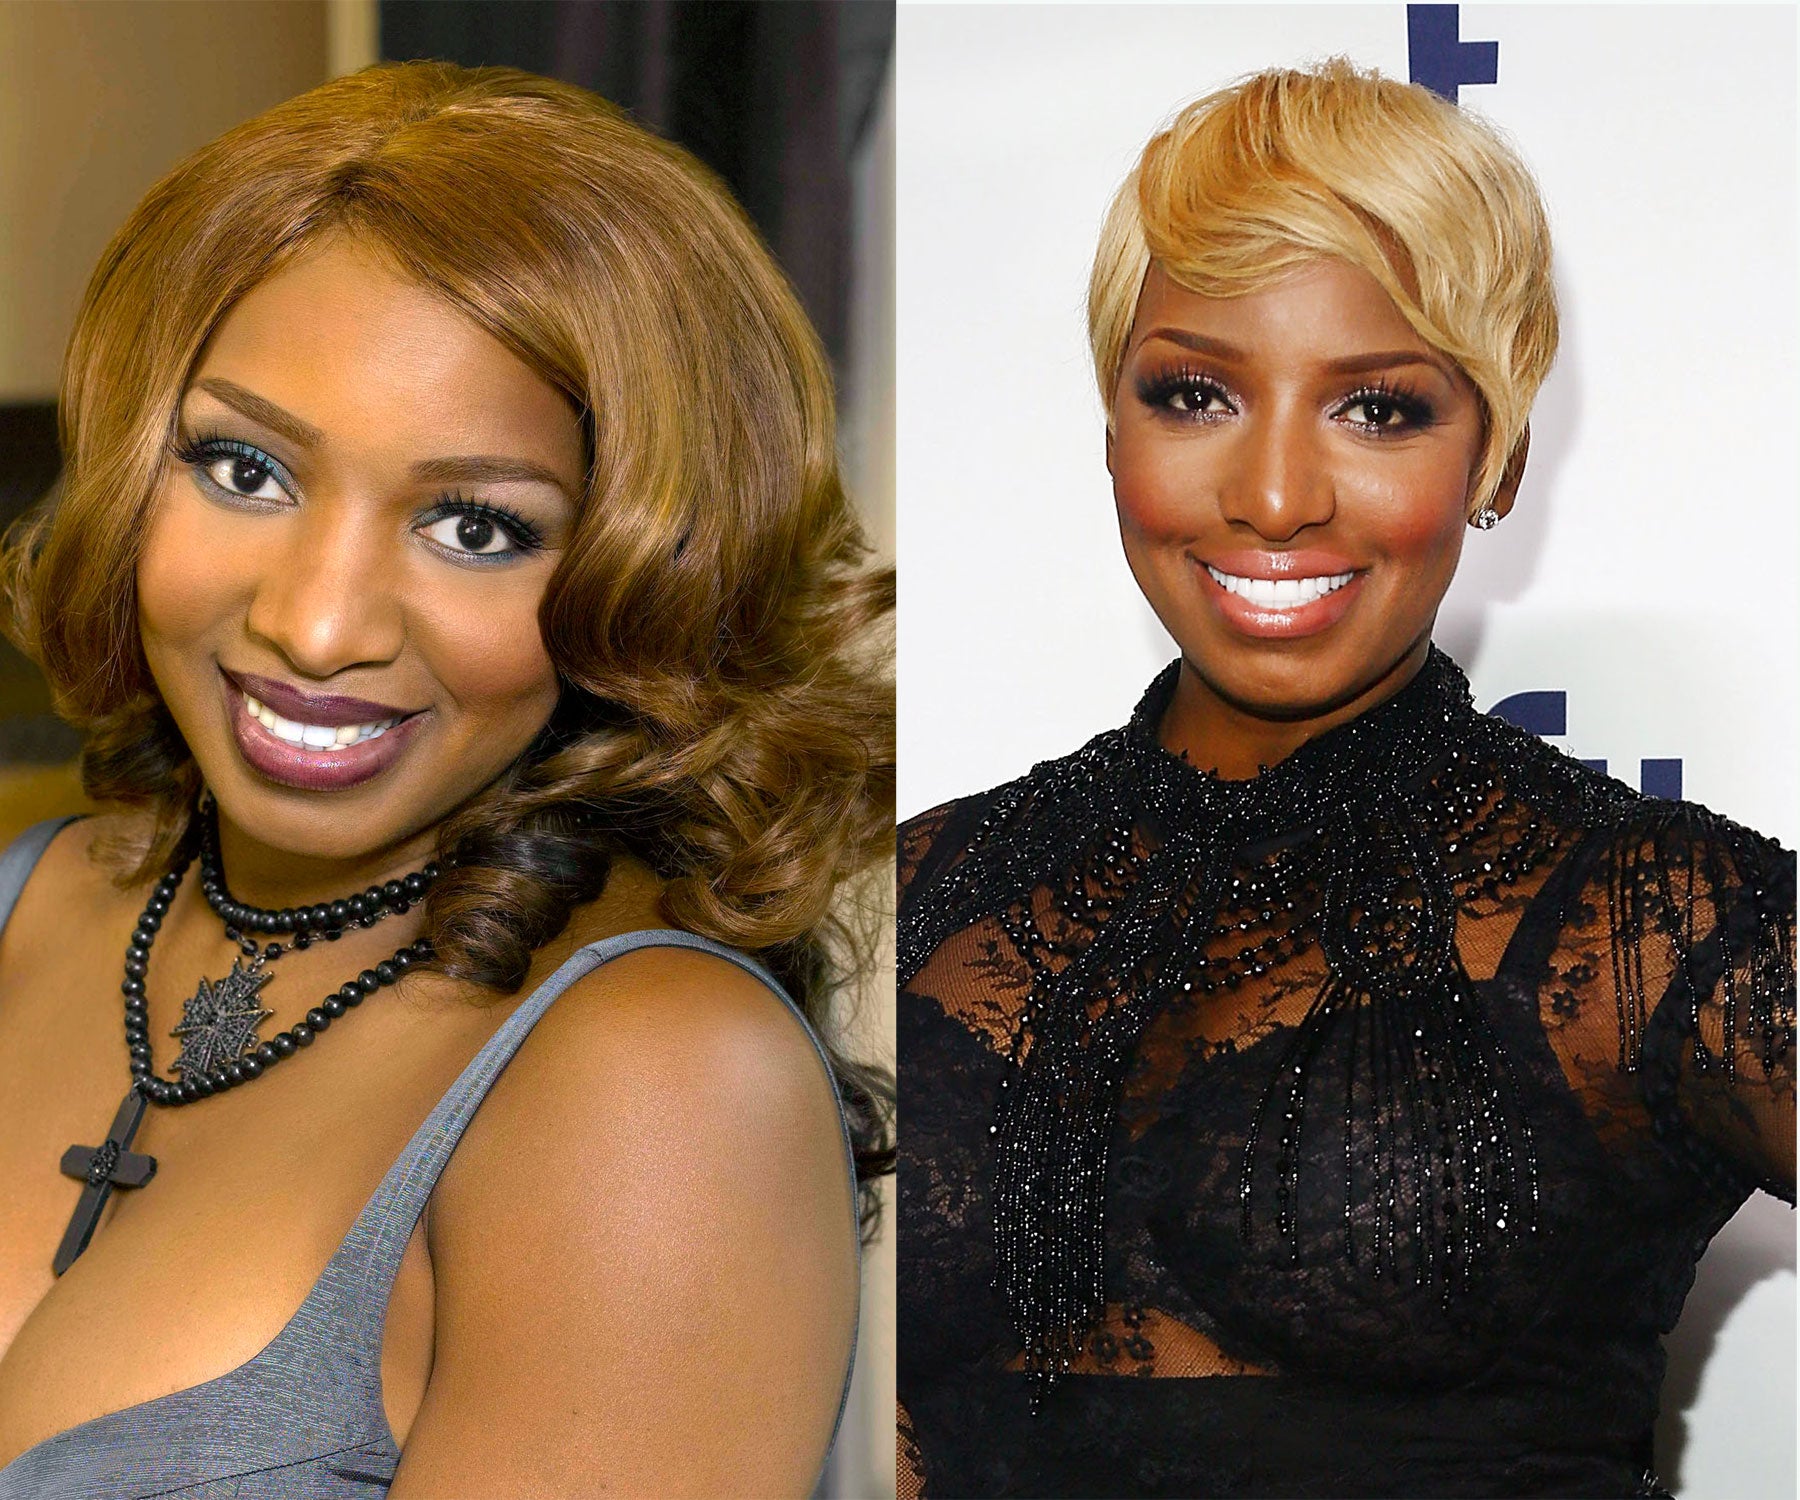 The Evolution of ‘The Real Housewives of Atlanta'
